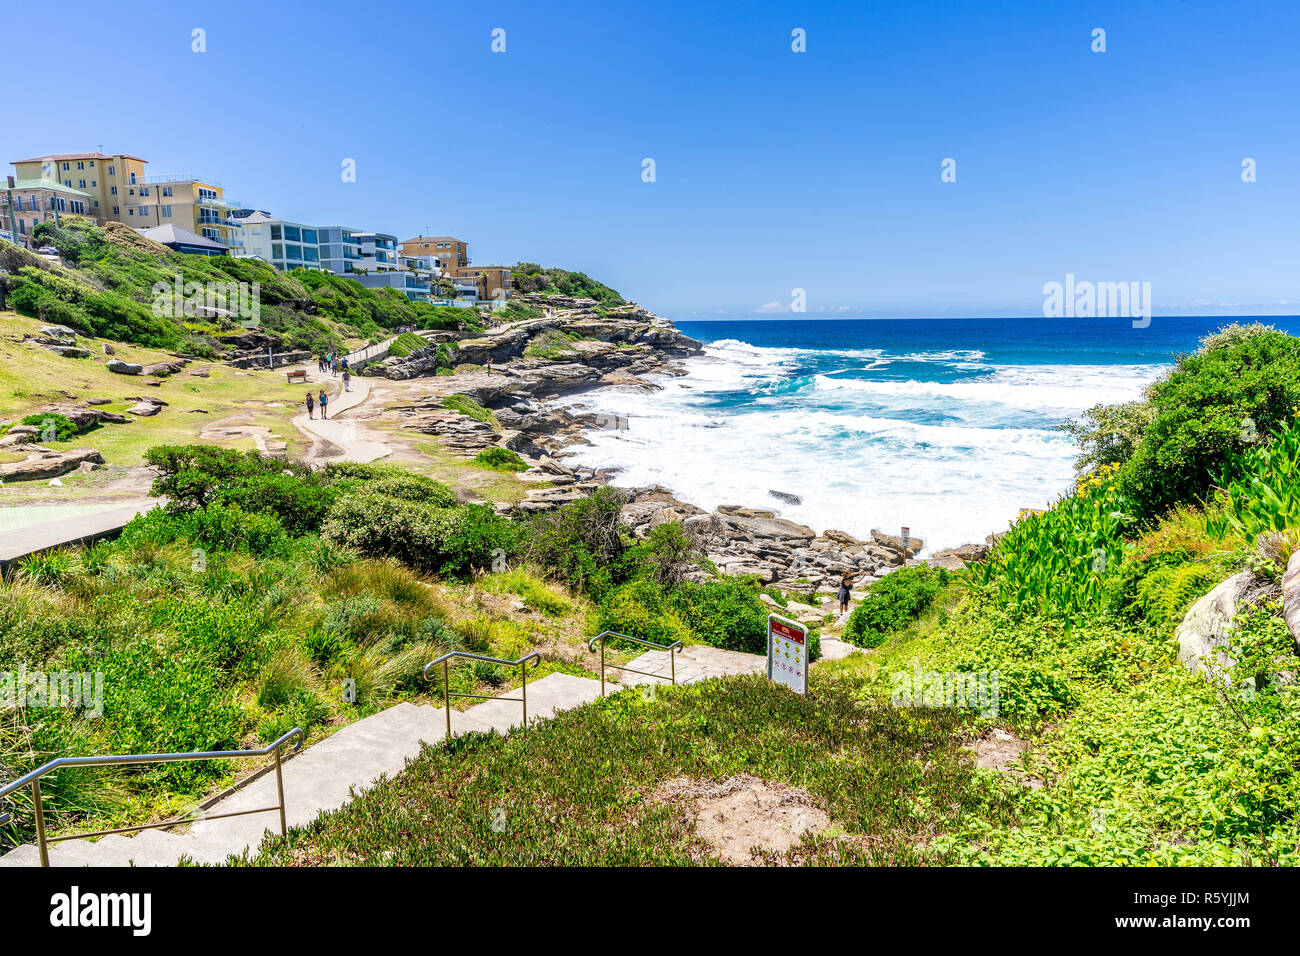 The classic Sydney Coastal walk from Bondi Beach to Coogee Beach is a favourite among locals and tourists. Stock Photo